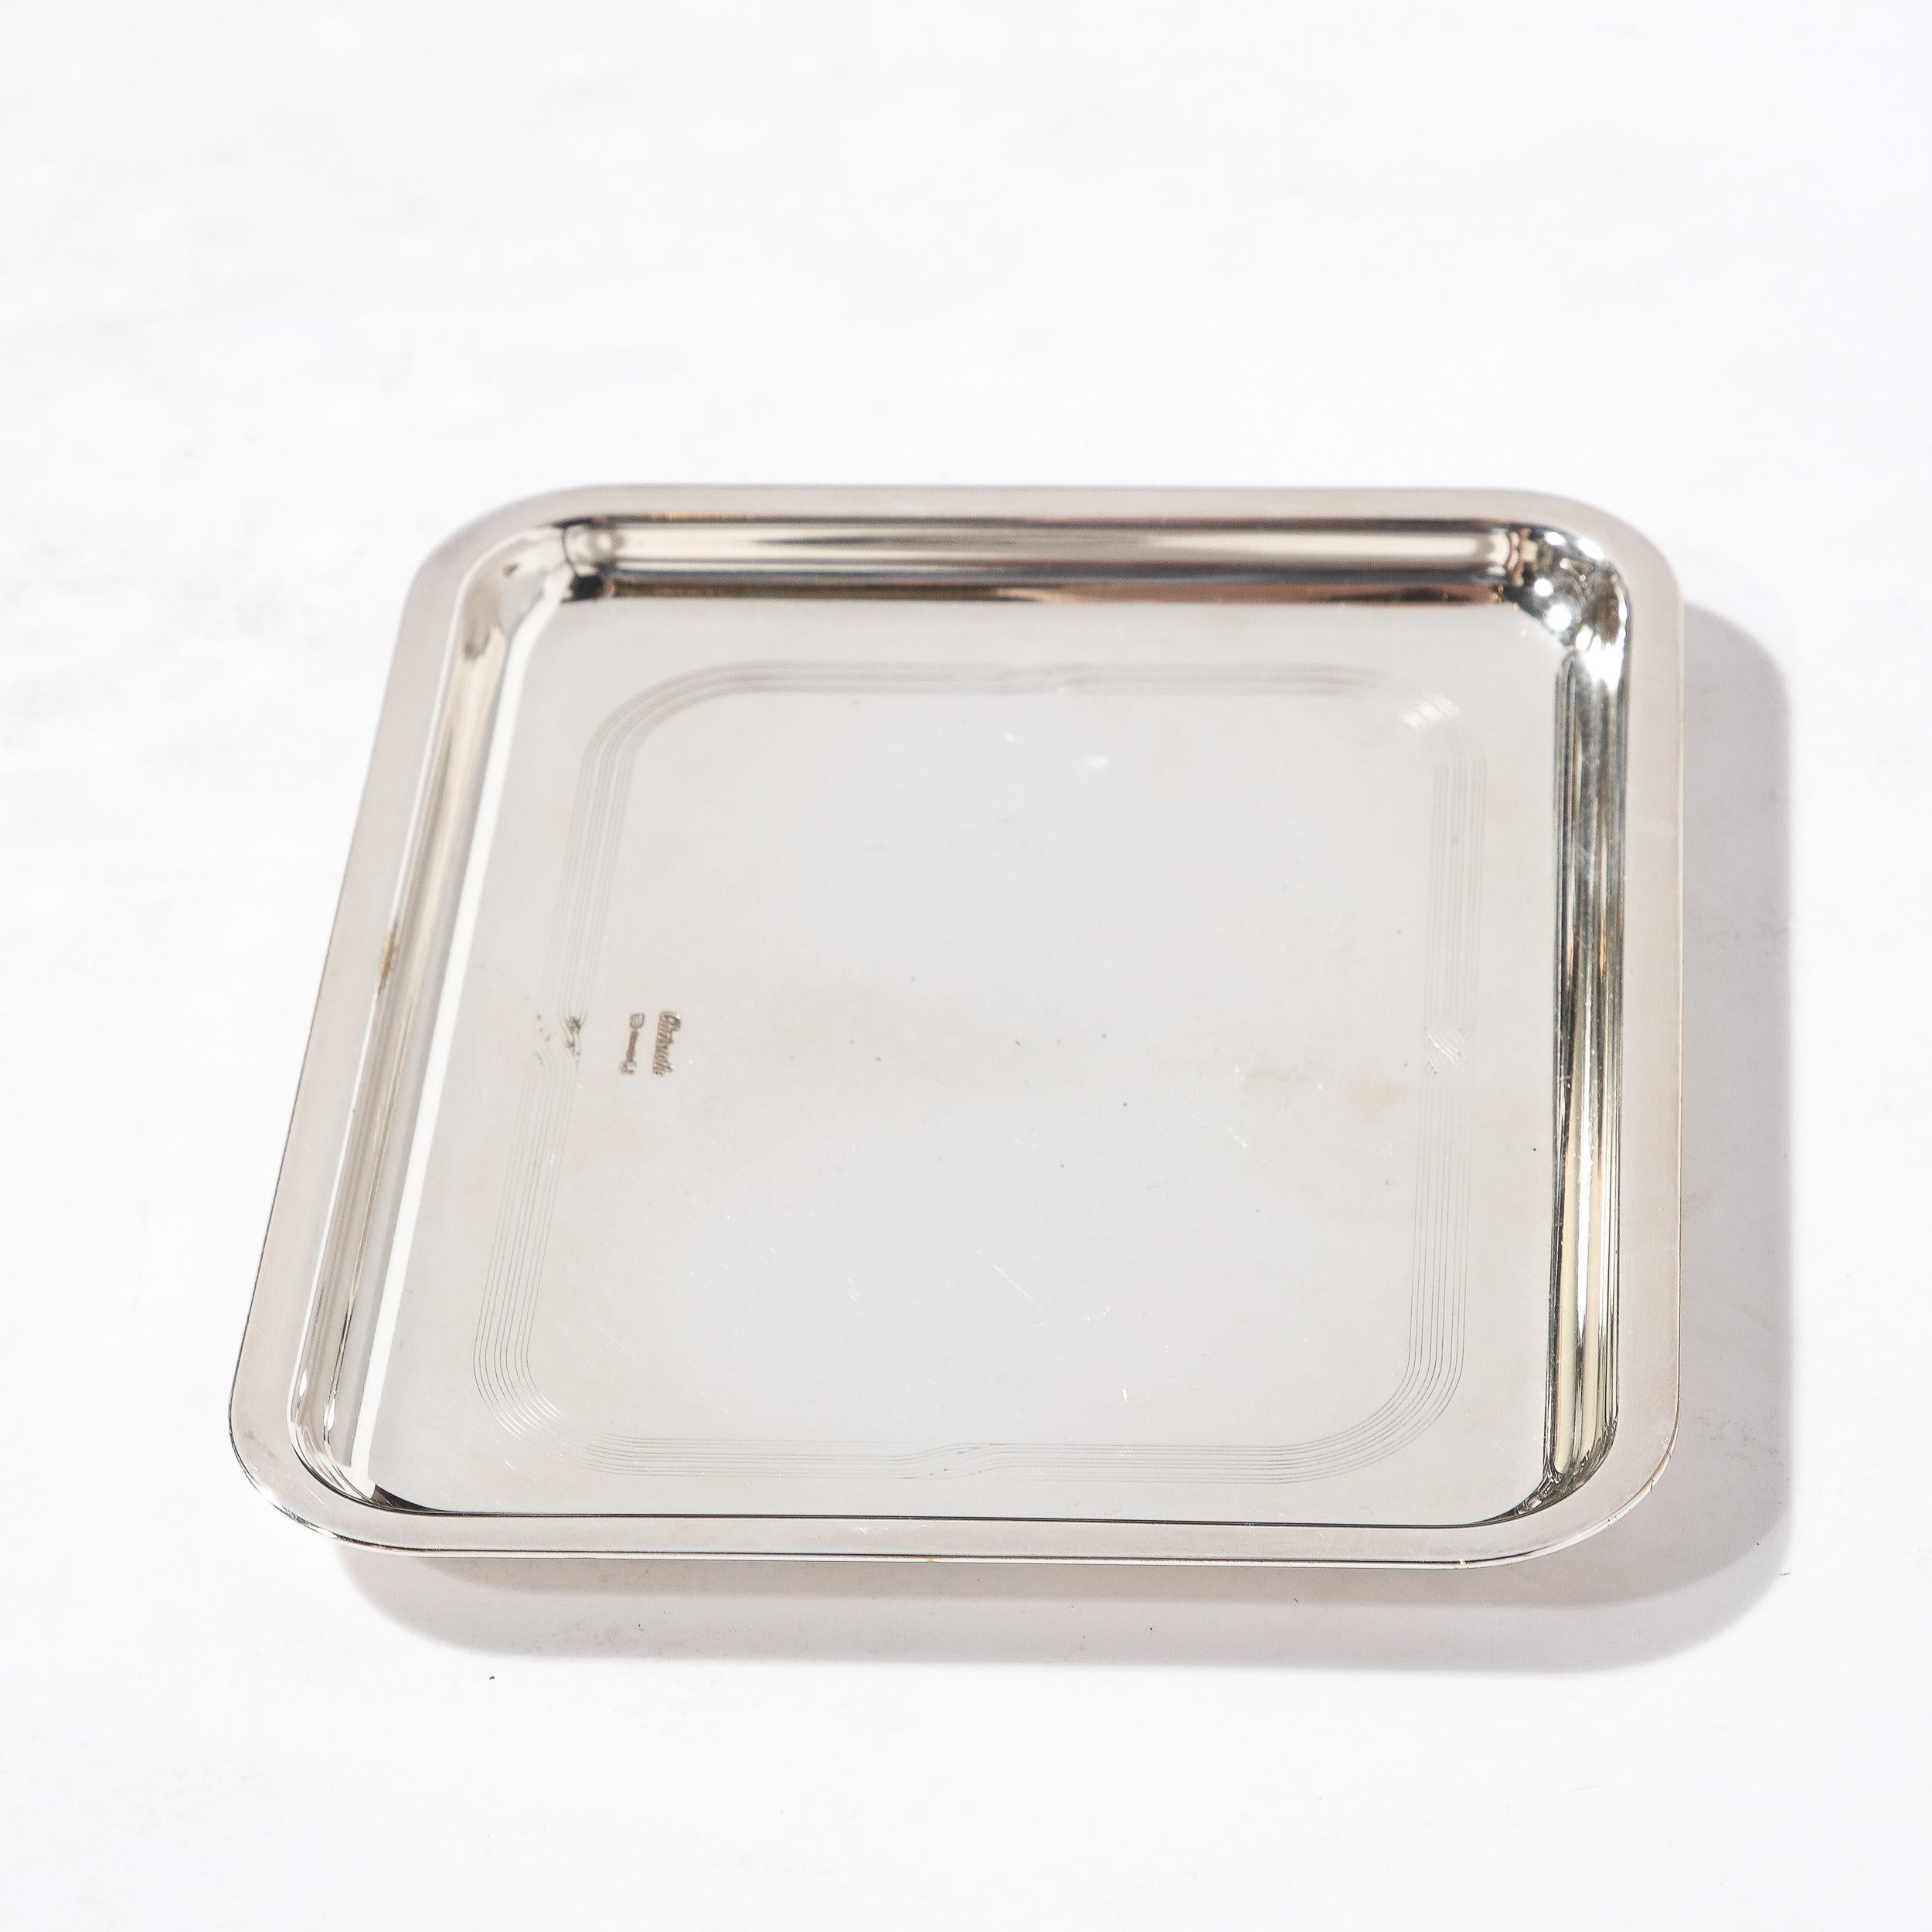 20th Century Christofle Silver-Plated Art Deco Style Tray with Engine Turned Engraving